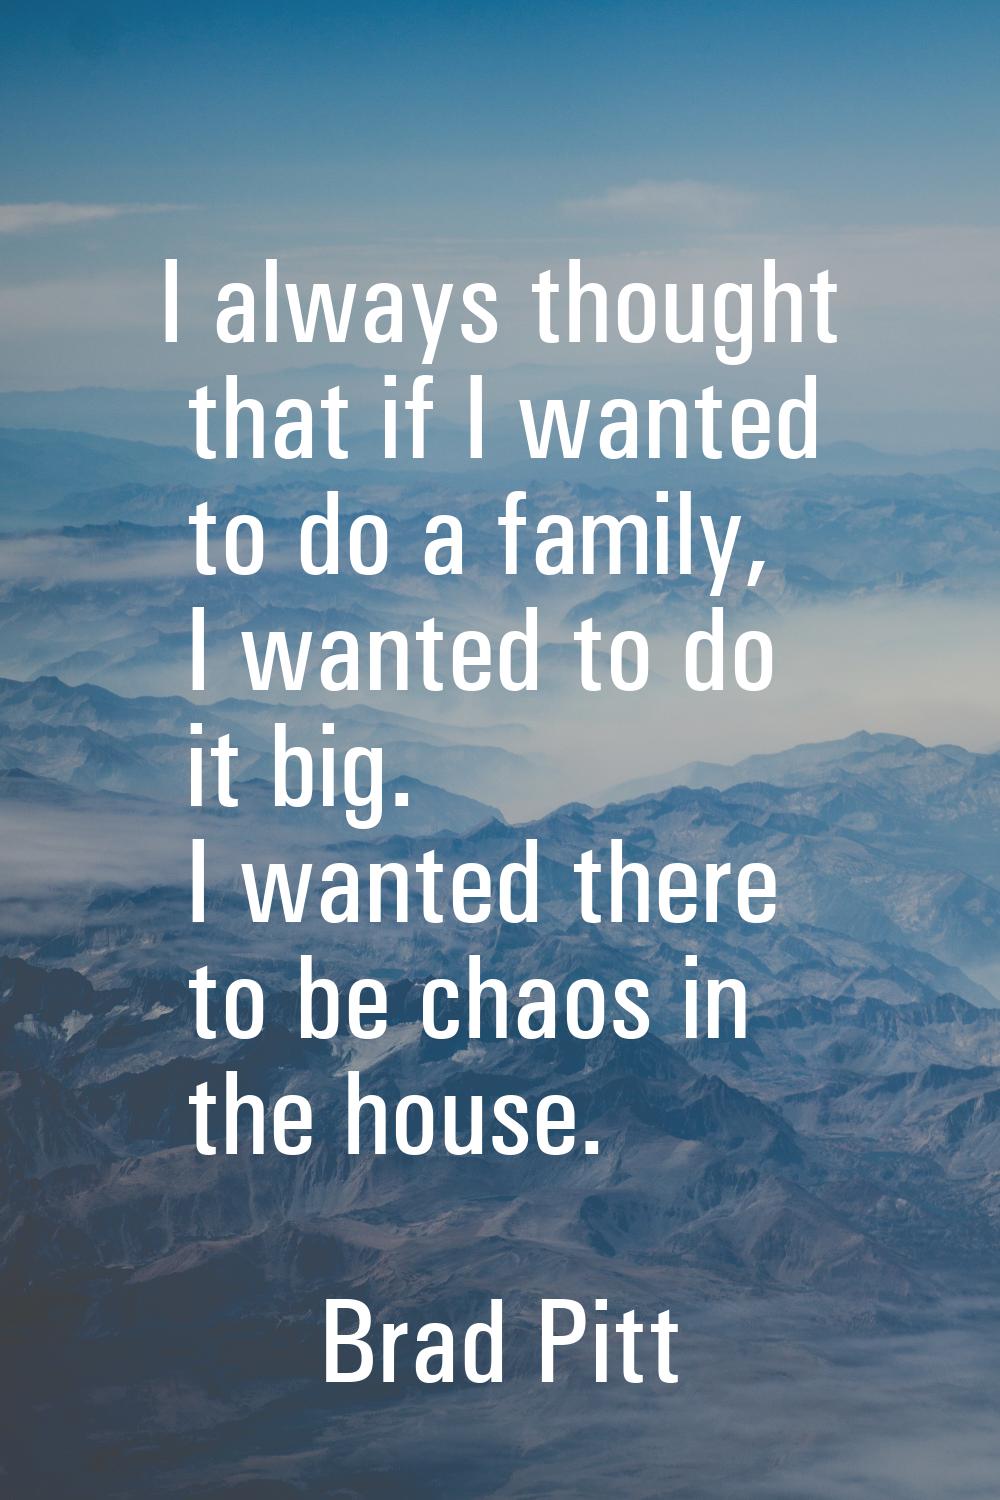 I always thought that if I wanted to do a family, I wanted to do it big. I wanted there to be chaos